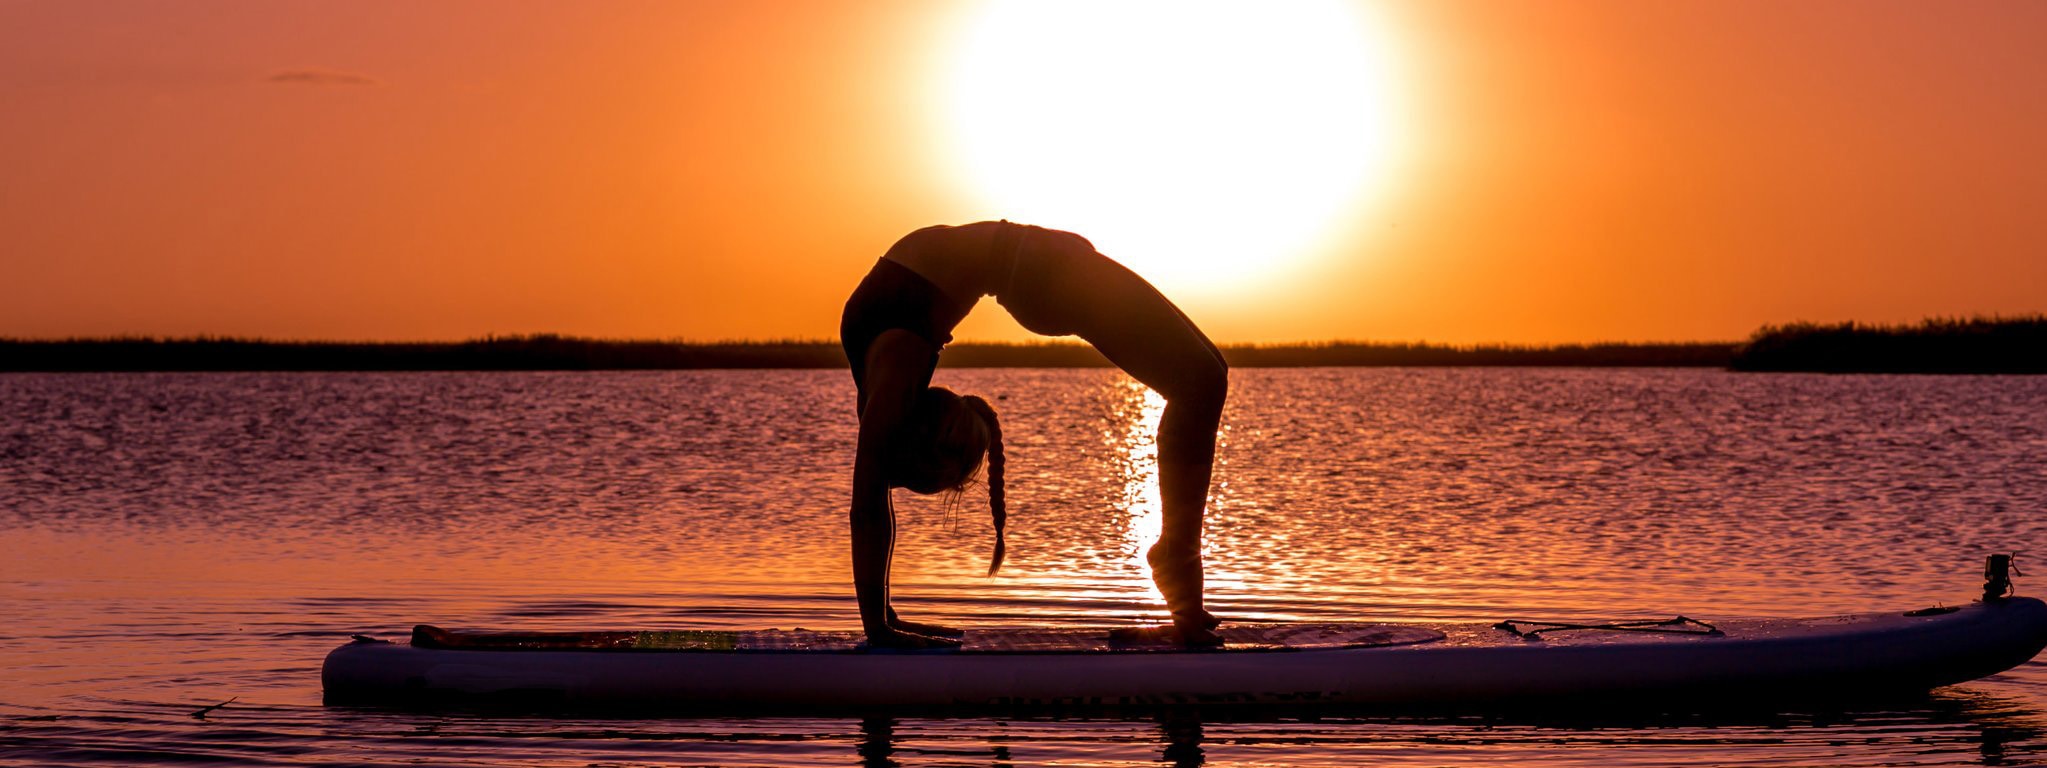 SUP Yoga: Benefits, Risks, and Workouts